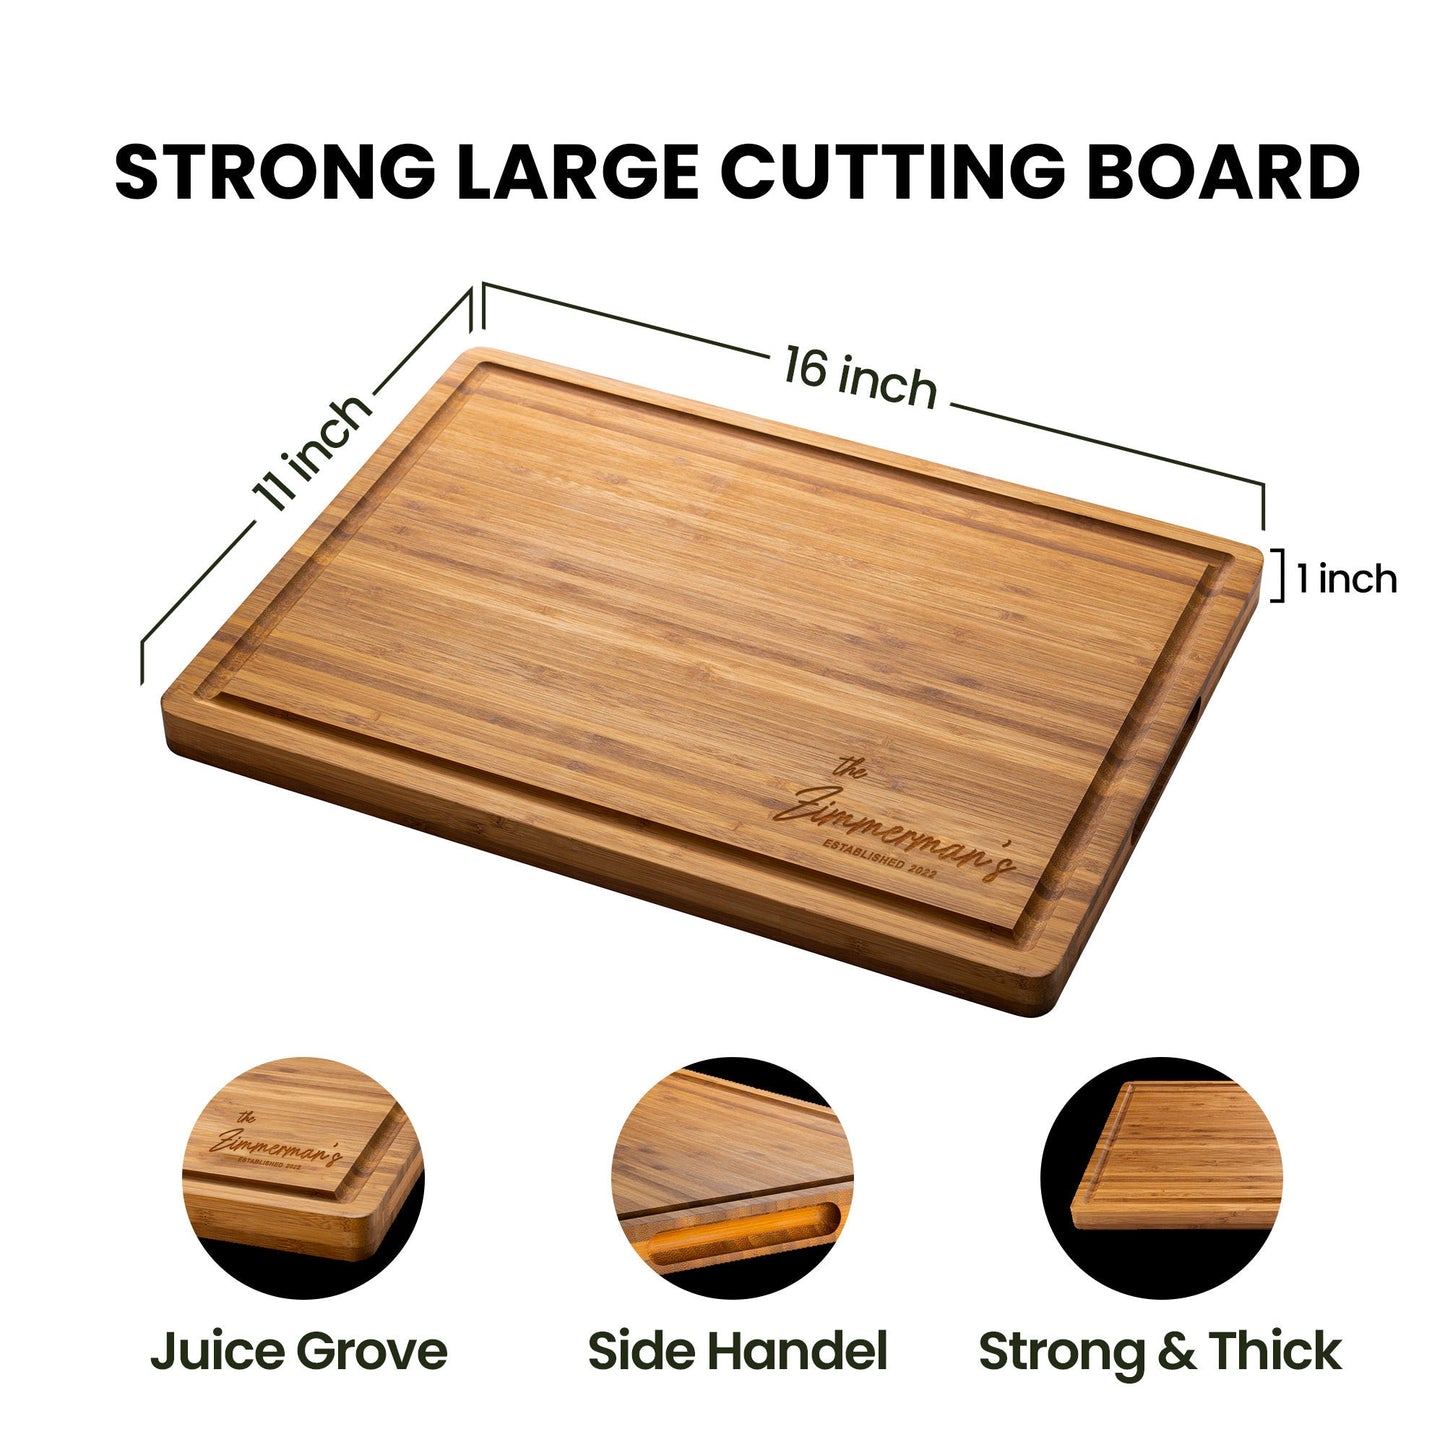 engraved-bamboo-cutting-board-highlighting-features.